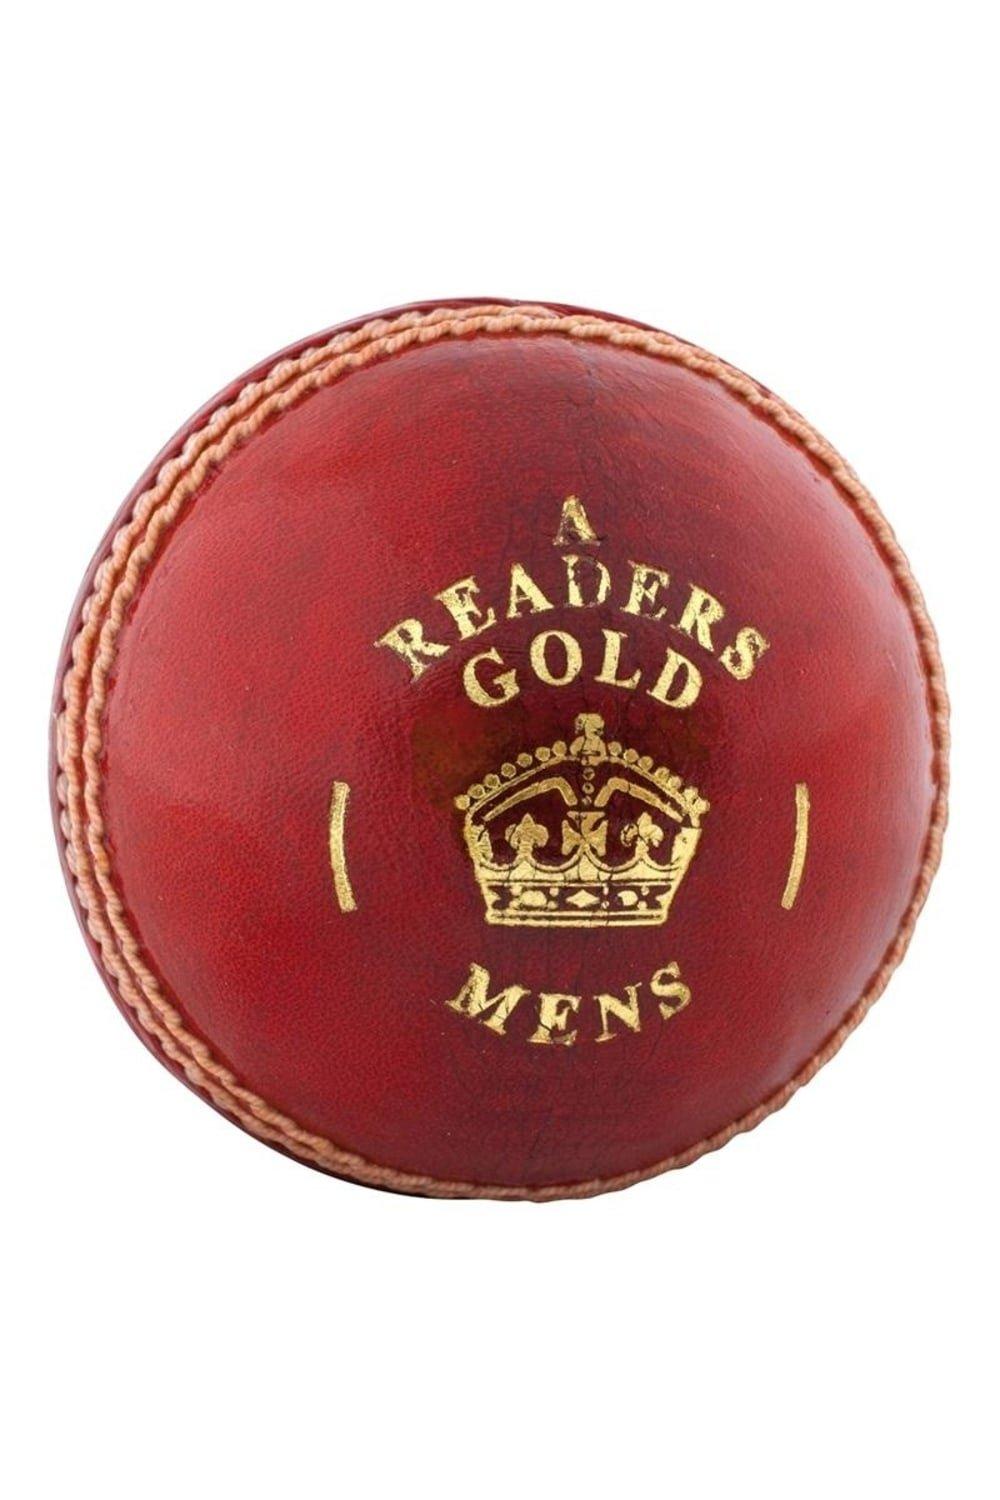 Gold A Leather Cricket Ball